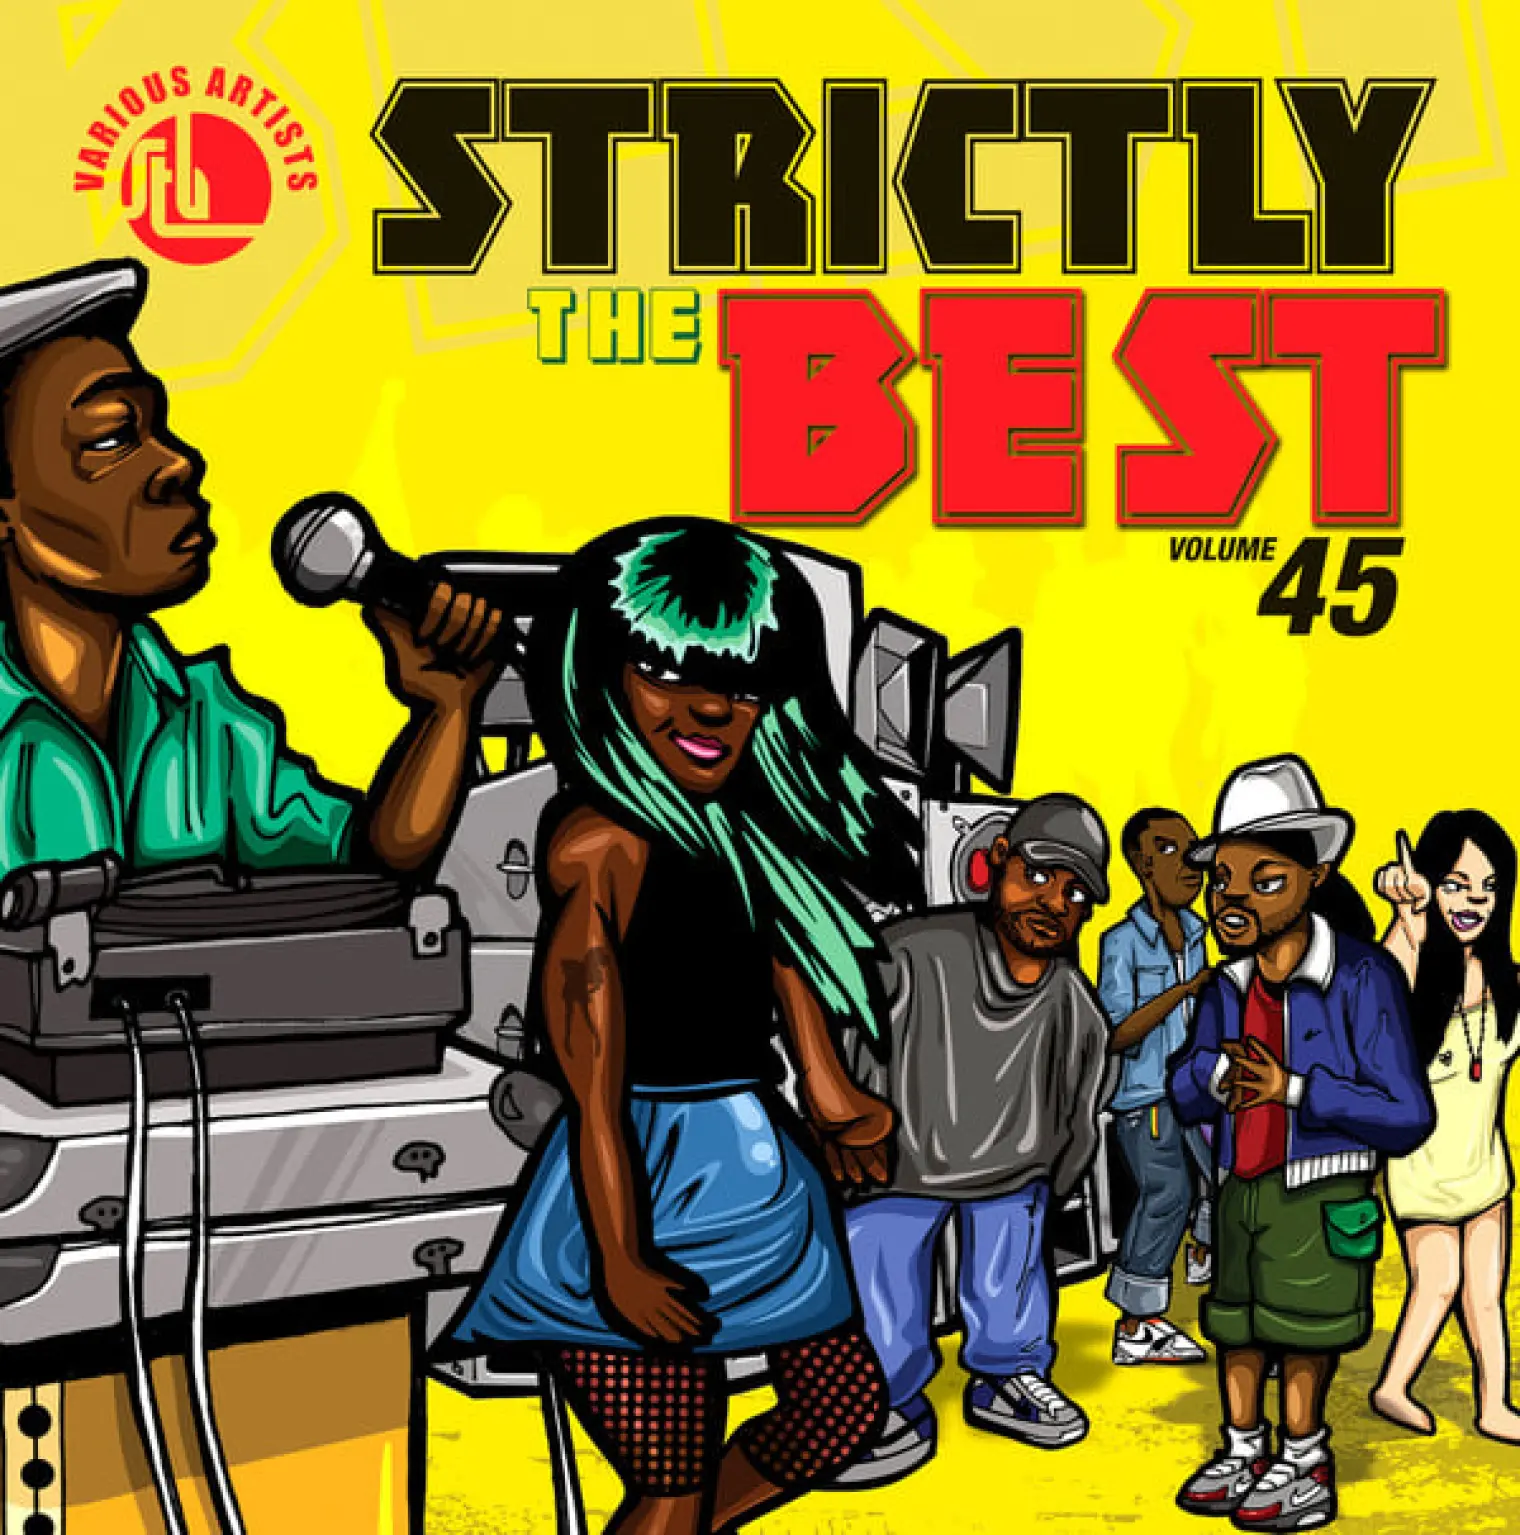 Strictly The Best Vol. 45 -  Strictly The Best 